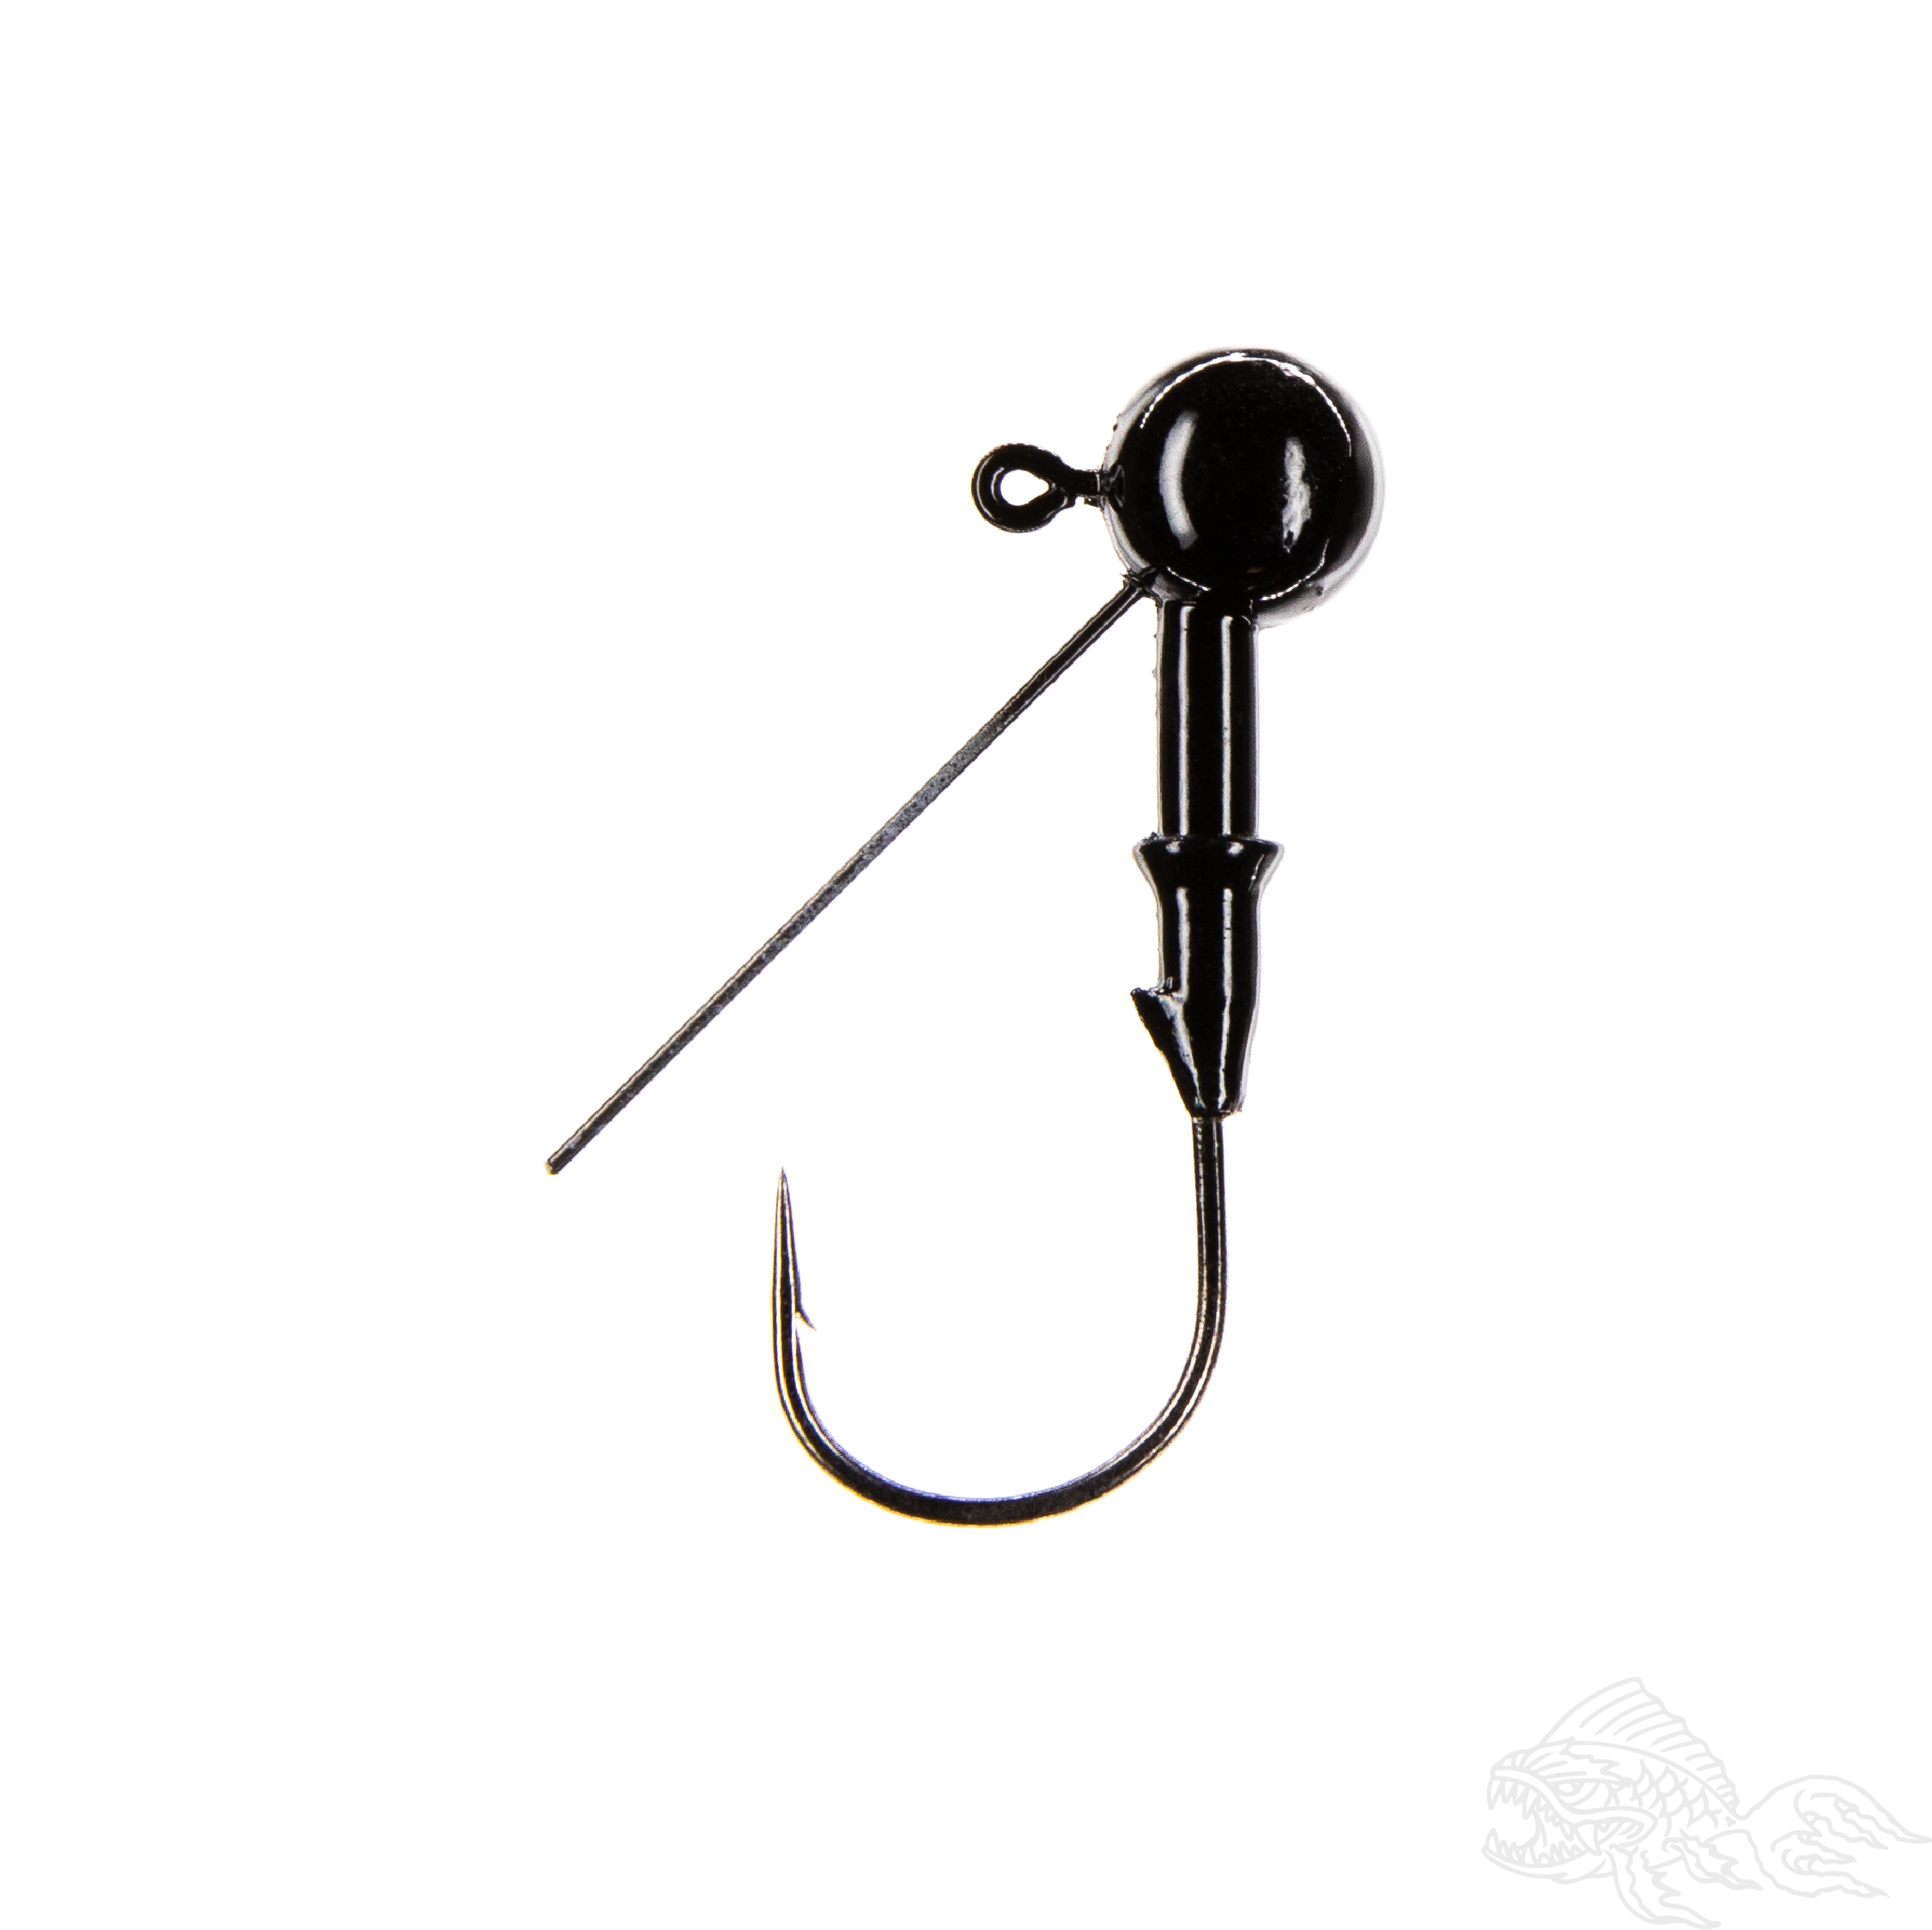 Wicked Willow (Wicked Weights/Mustad) – Fish or Die Bait Company